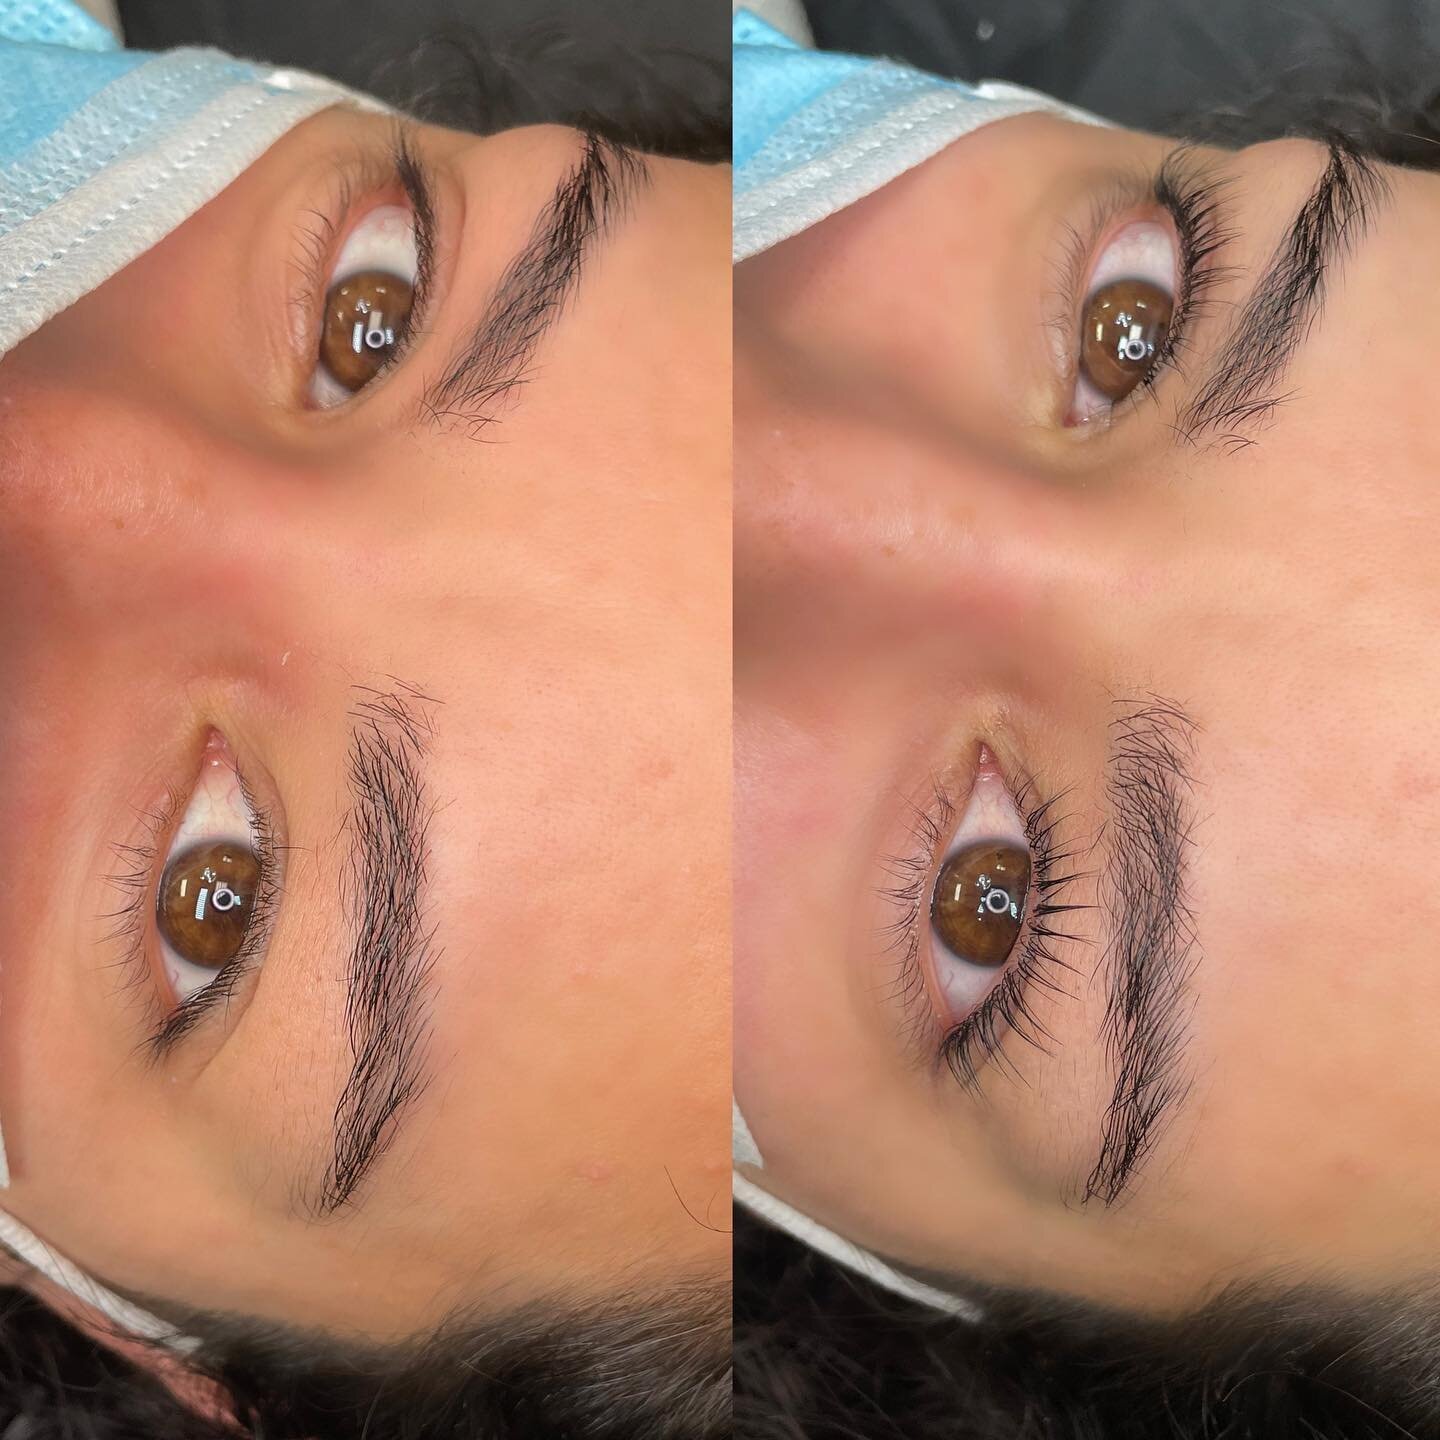 Keratin Lash Lift &amp; Tint🦋
✨New clients receive $20 off first lash set|$10 off lift &amp; tint|$5 off brow wax &amp; tint✨
.
.
Call (732) 970-4390 to book 
Or visit our website to book anytime! (Link in bio) 
.
.
#volume #volumelashes #hybridlash